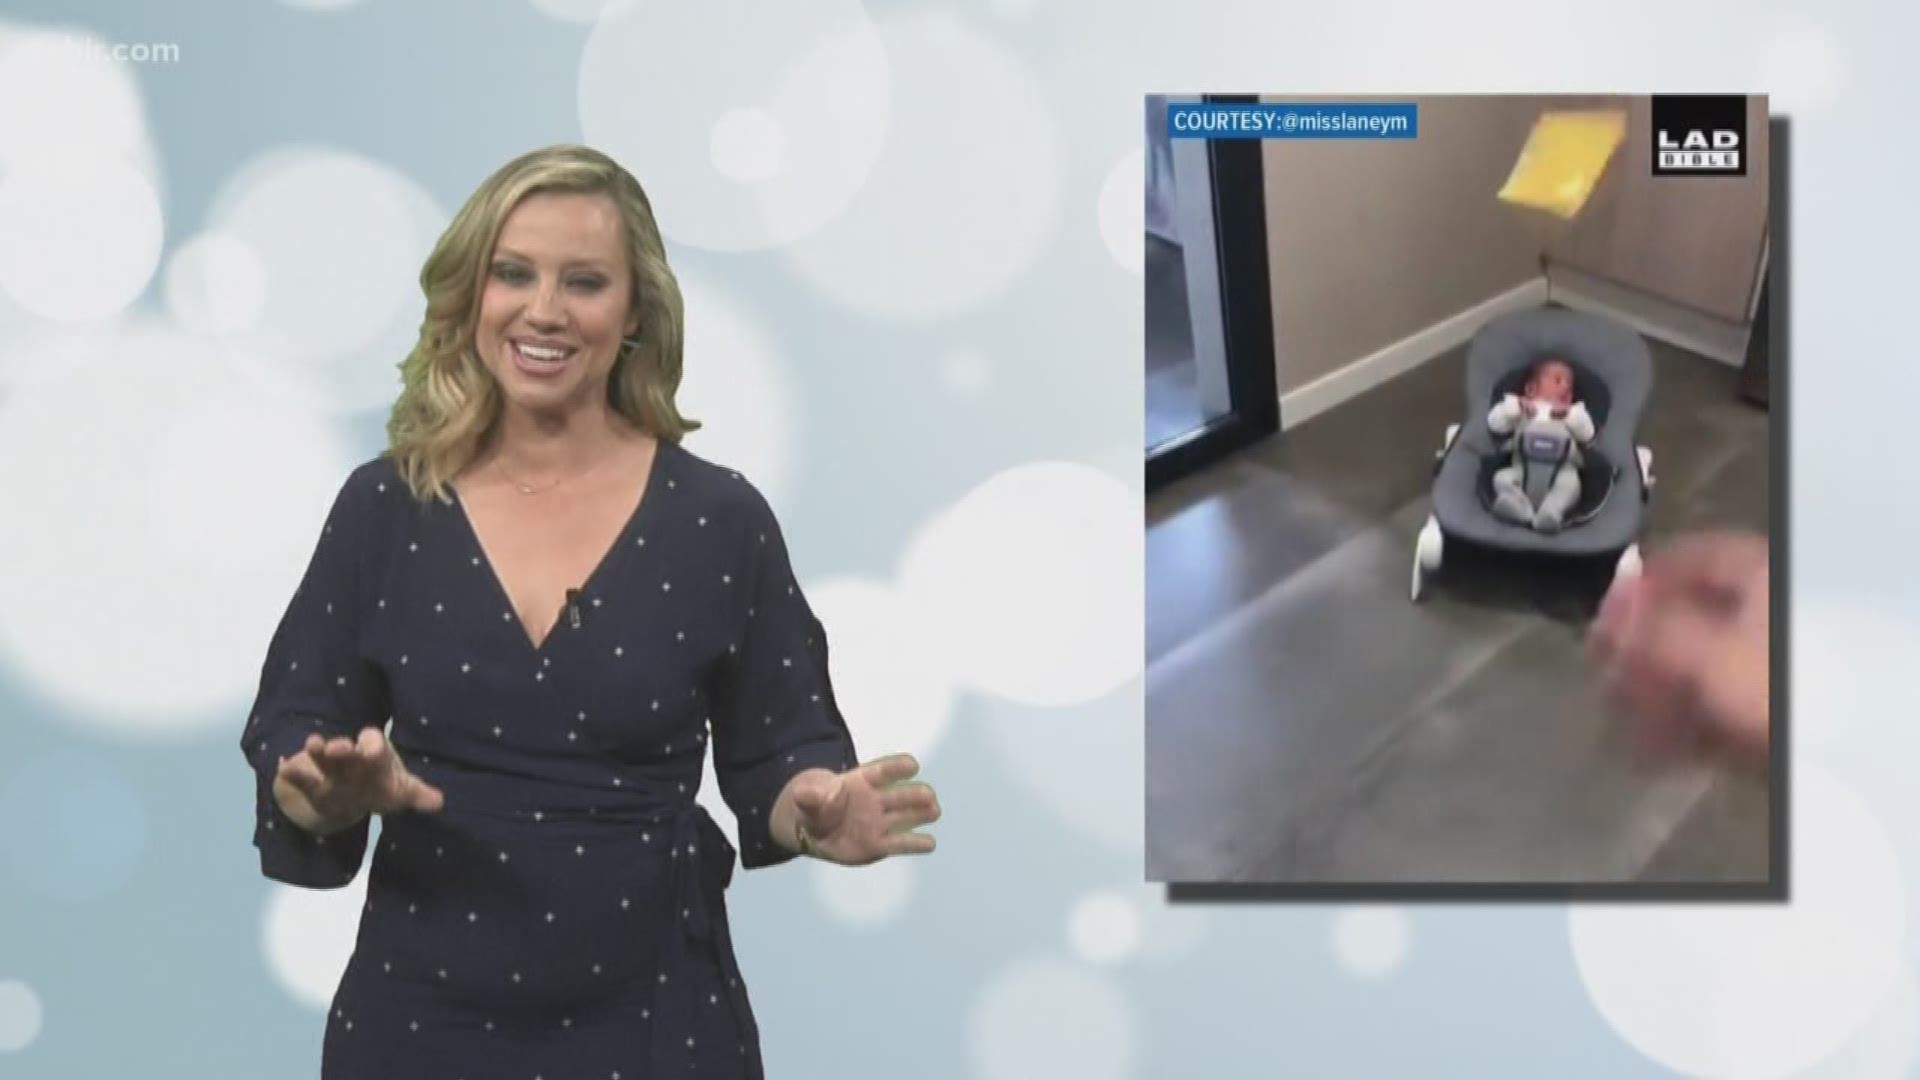 10News Anchor Abby Ham is chatting about what's popping this morning.